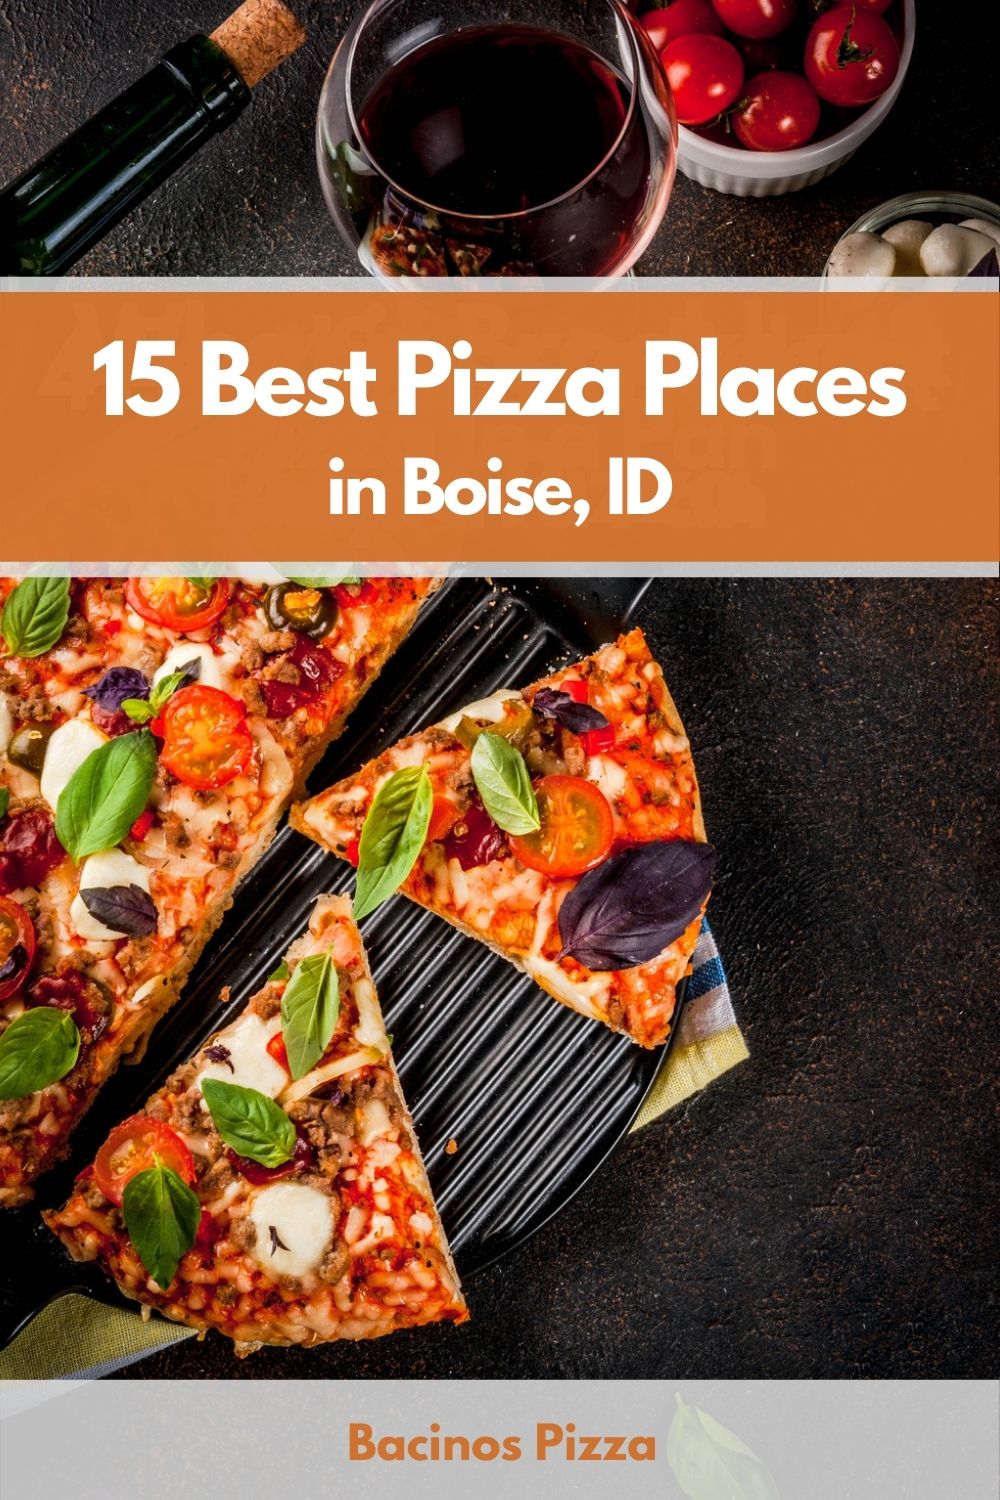 15 Best Pizza Places in Boise, ID pin 2